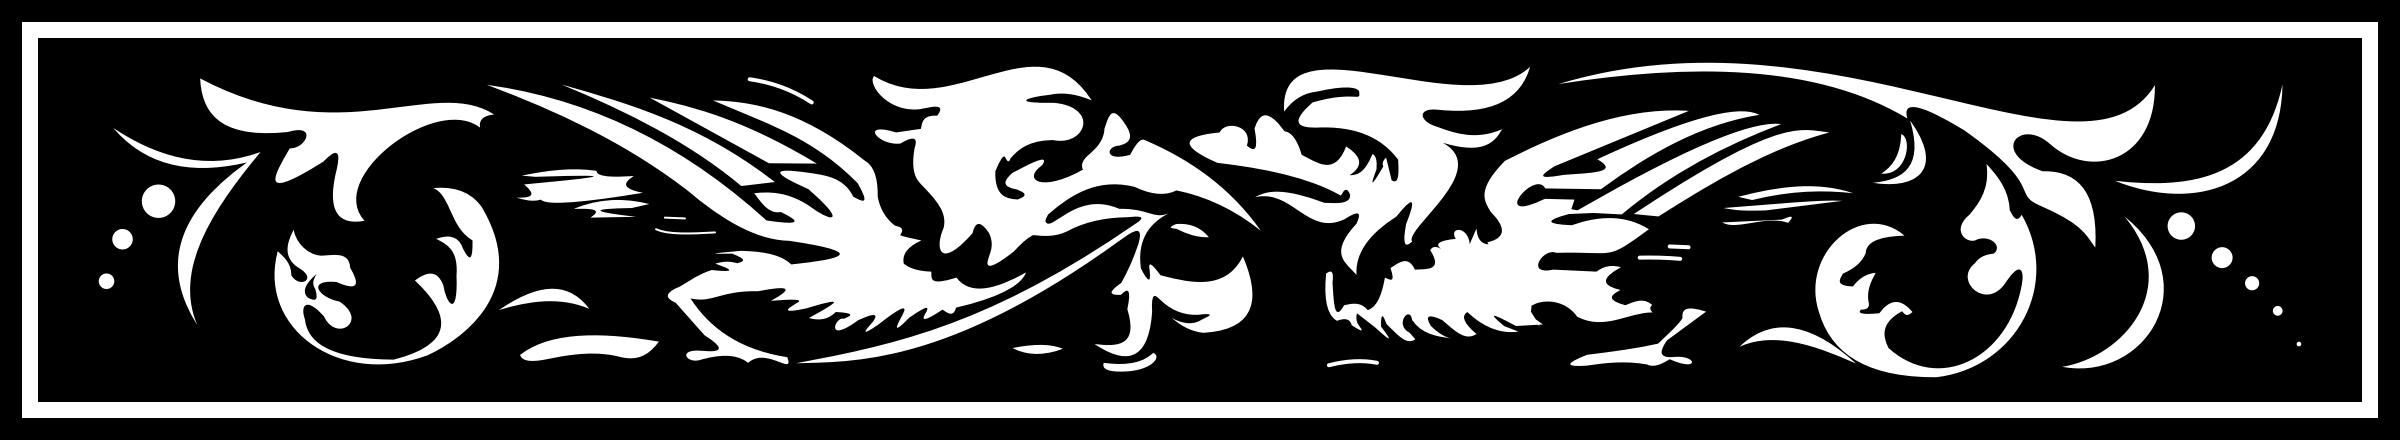 Woodcut Banner - Fighting Birds png